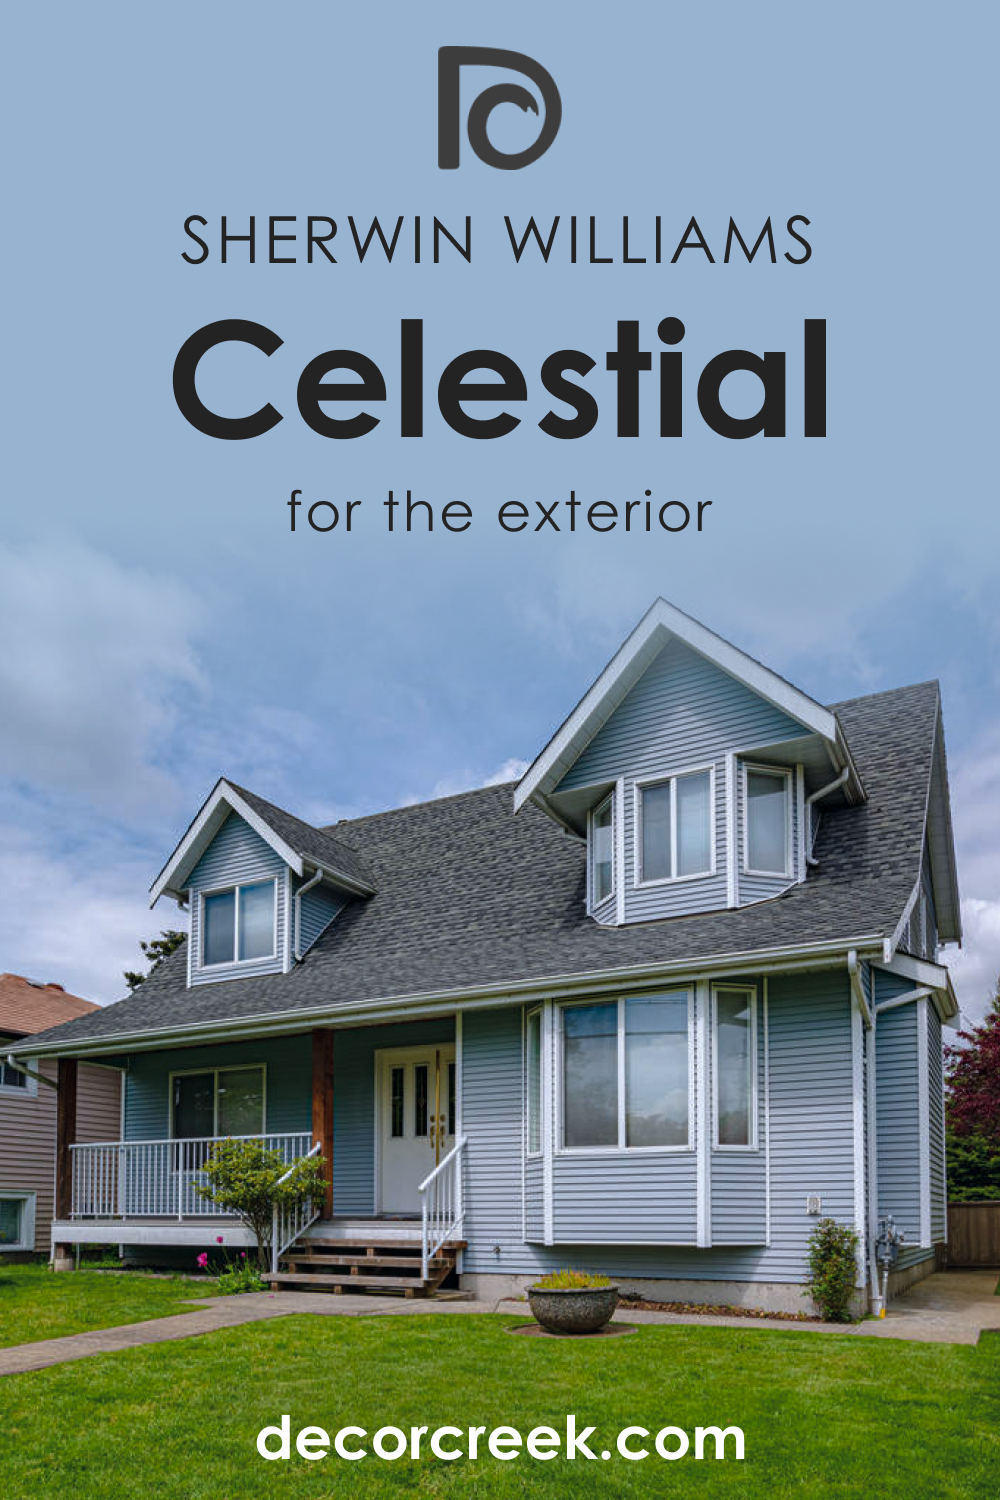 How to Use SW 6808 Celestial for an Exterior?